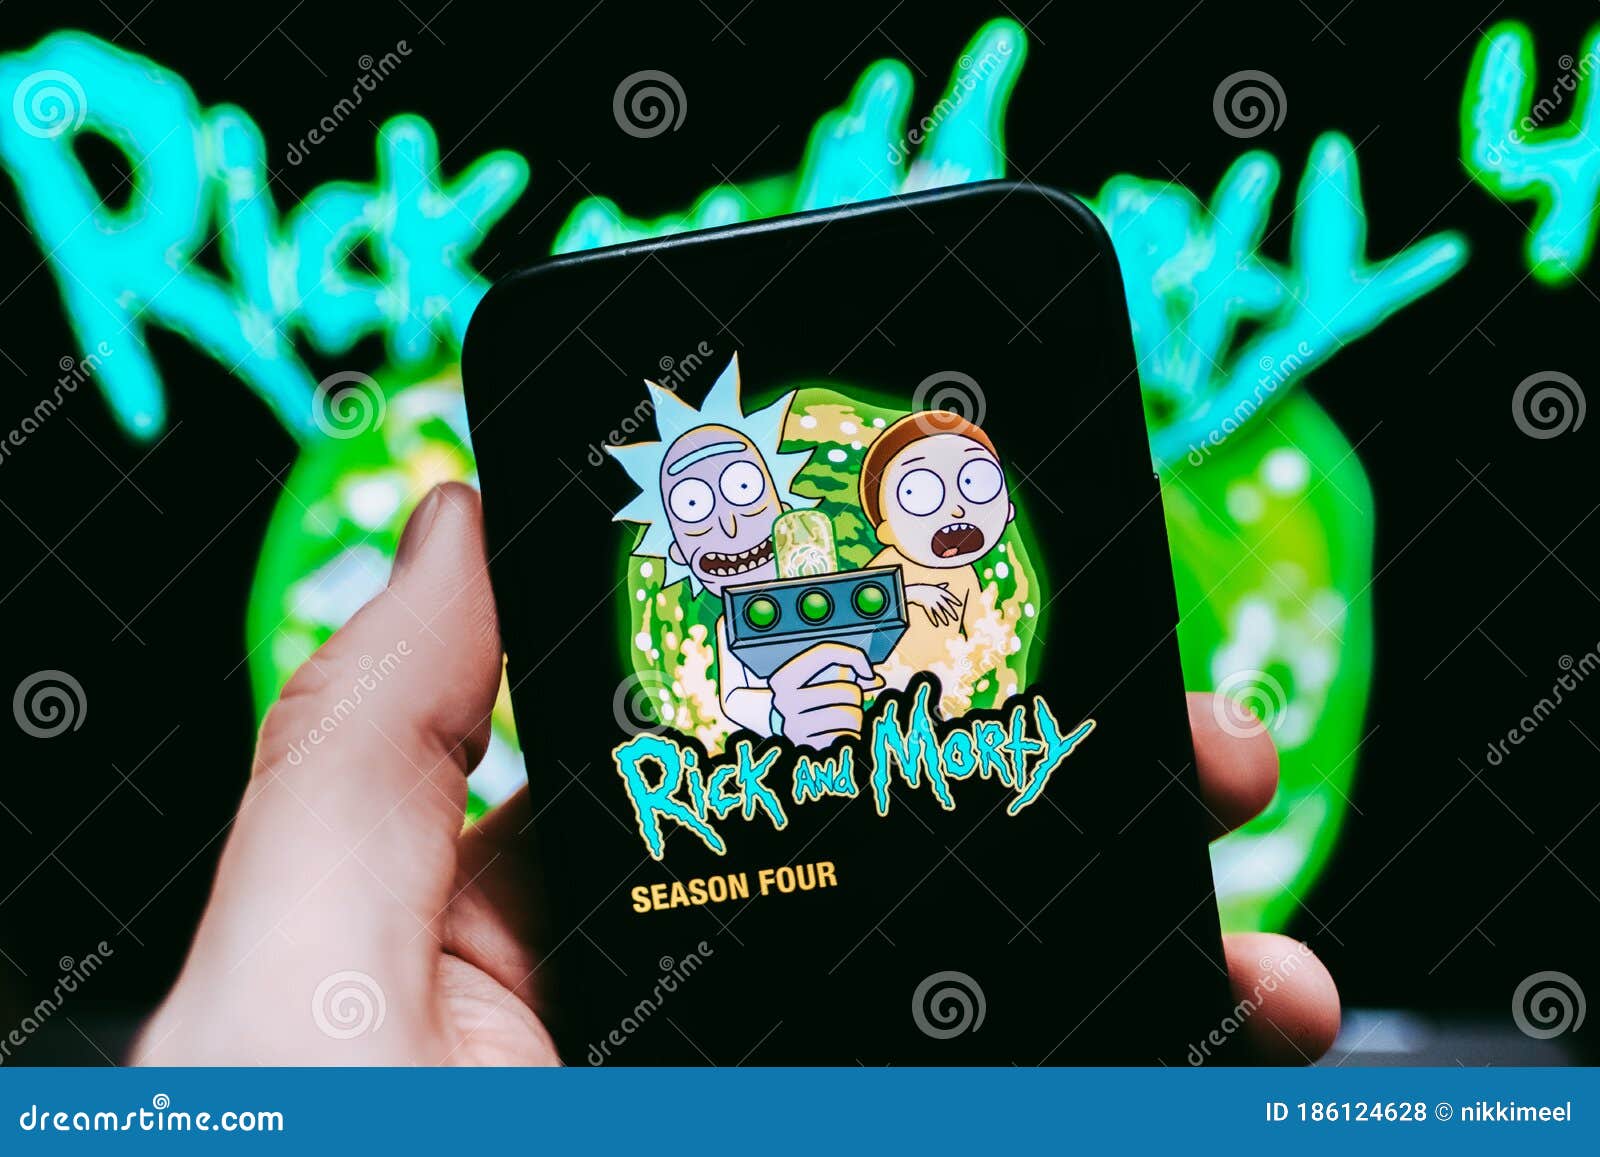 Rick And Morty Wallpaper Iphone - Live Wallpaper HD  Rick and morty  poster, Rick and morty, Iphone wallpaper